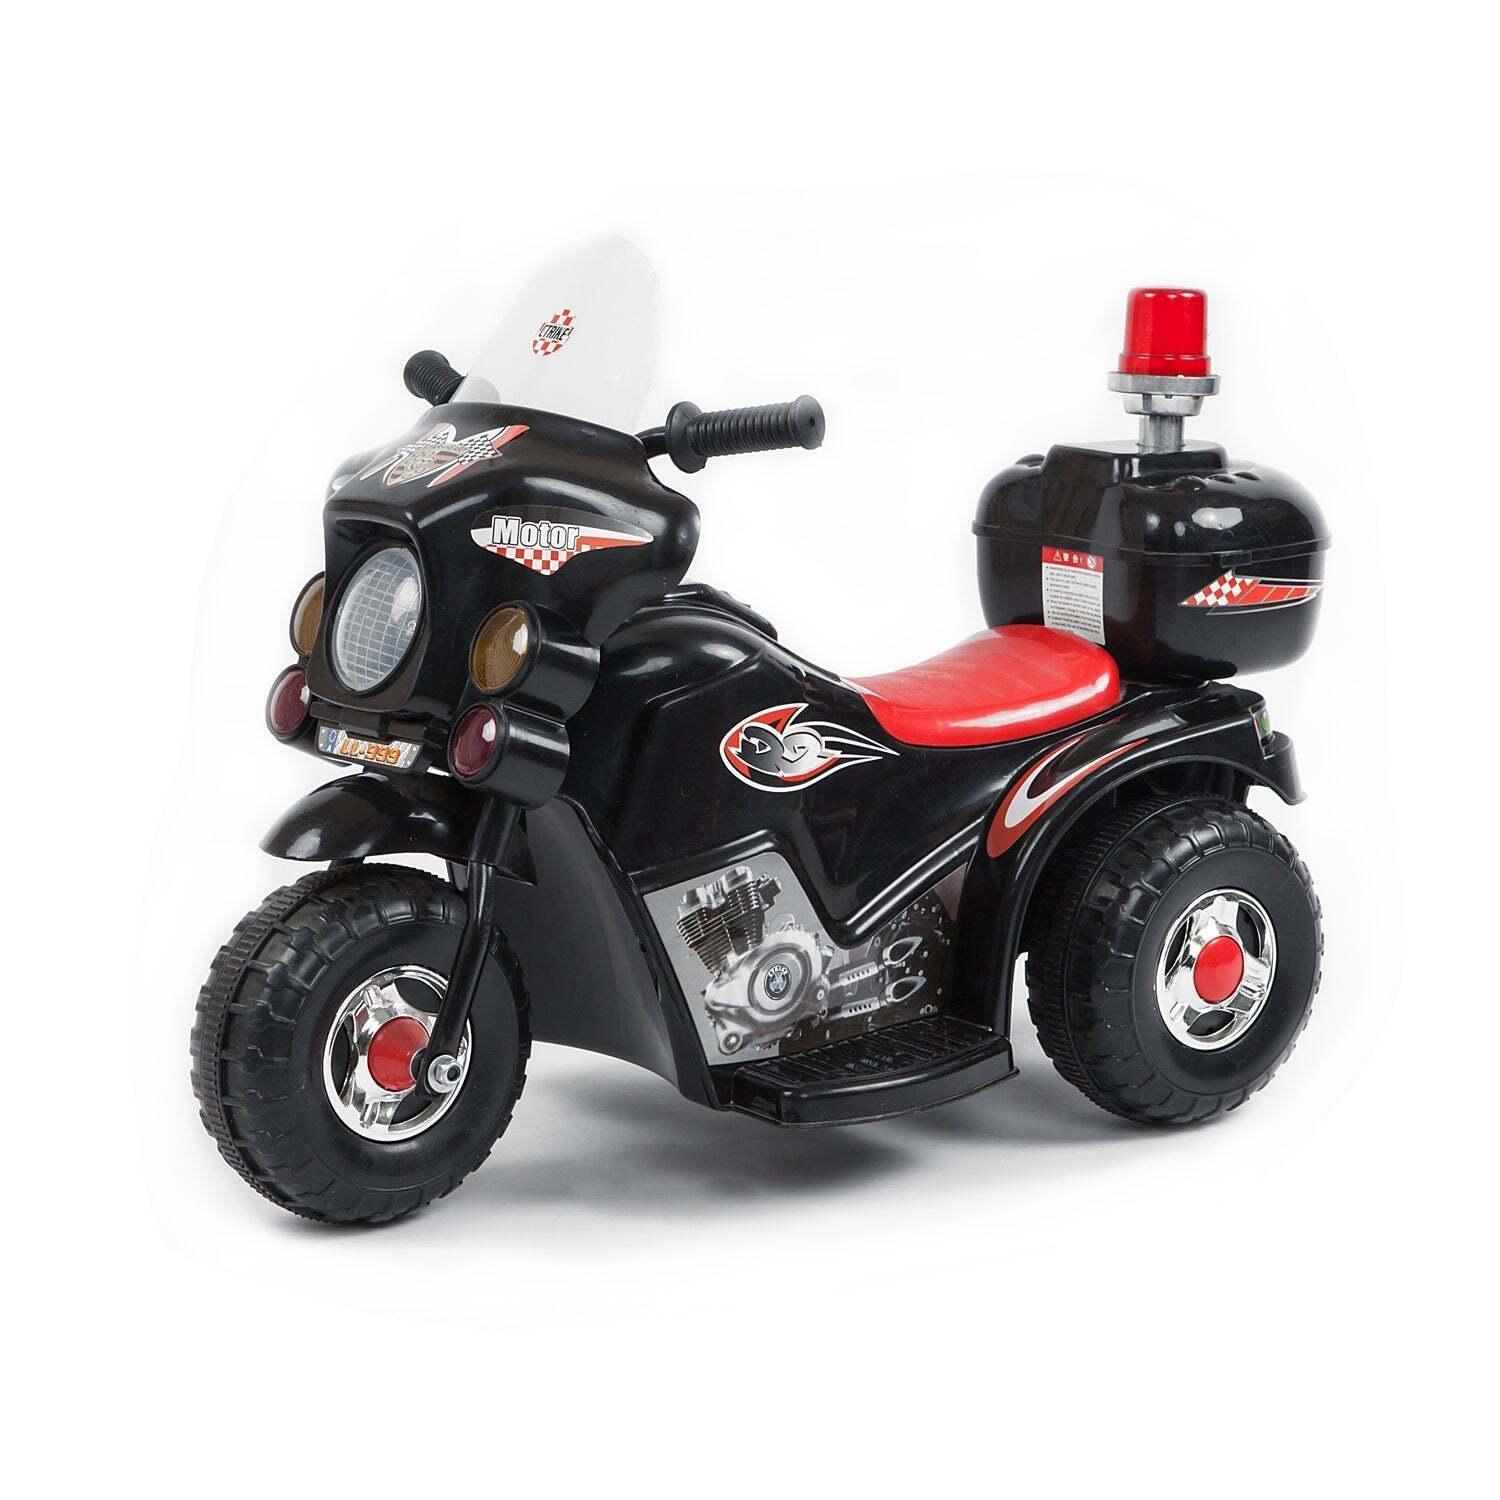 Lenoxx Children's Rechargeable Electric Ride-on Motorcycle (Up to 1hr) - Black